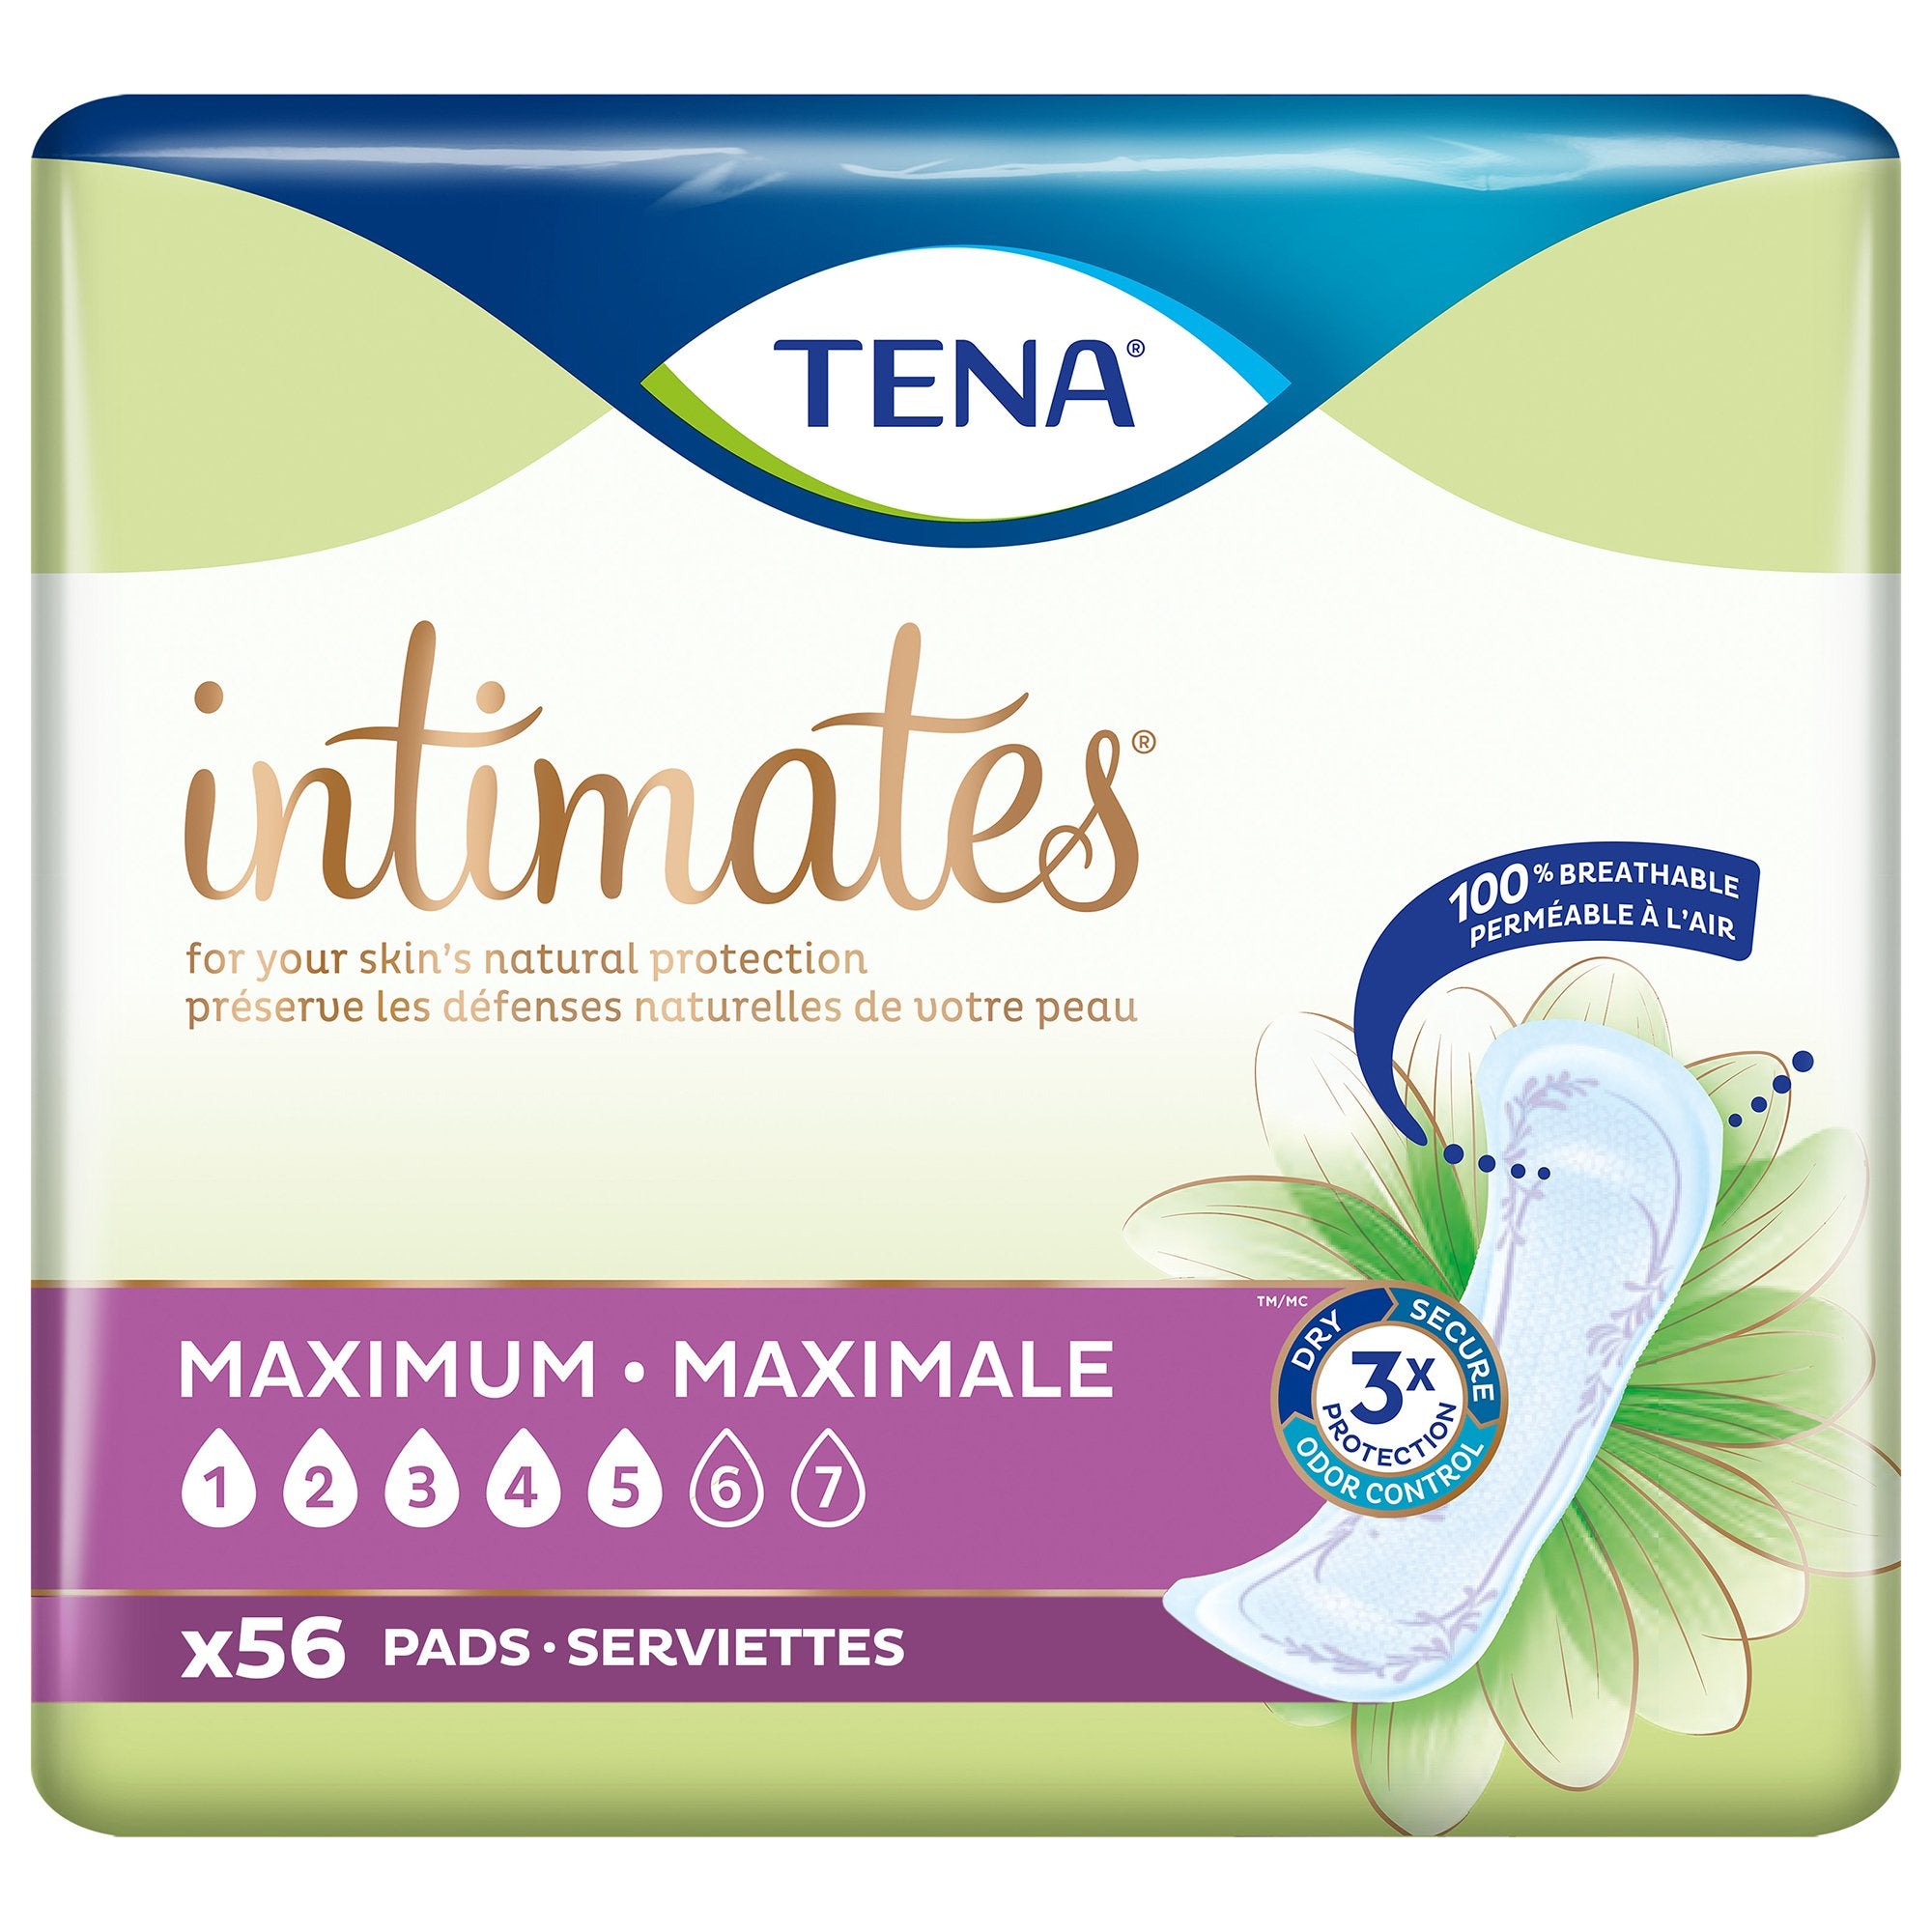 Bladder Control Pad TENA Intimates Maximum 13 Inch Length Heavy Absorbency Dry-Fast Core One Size Fits Most